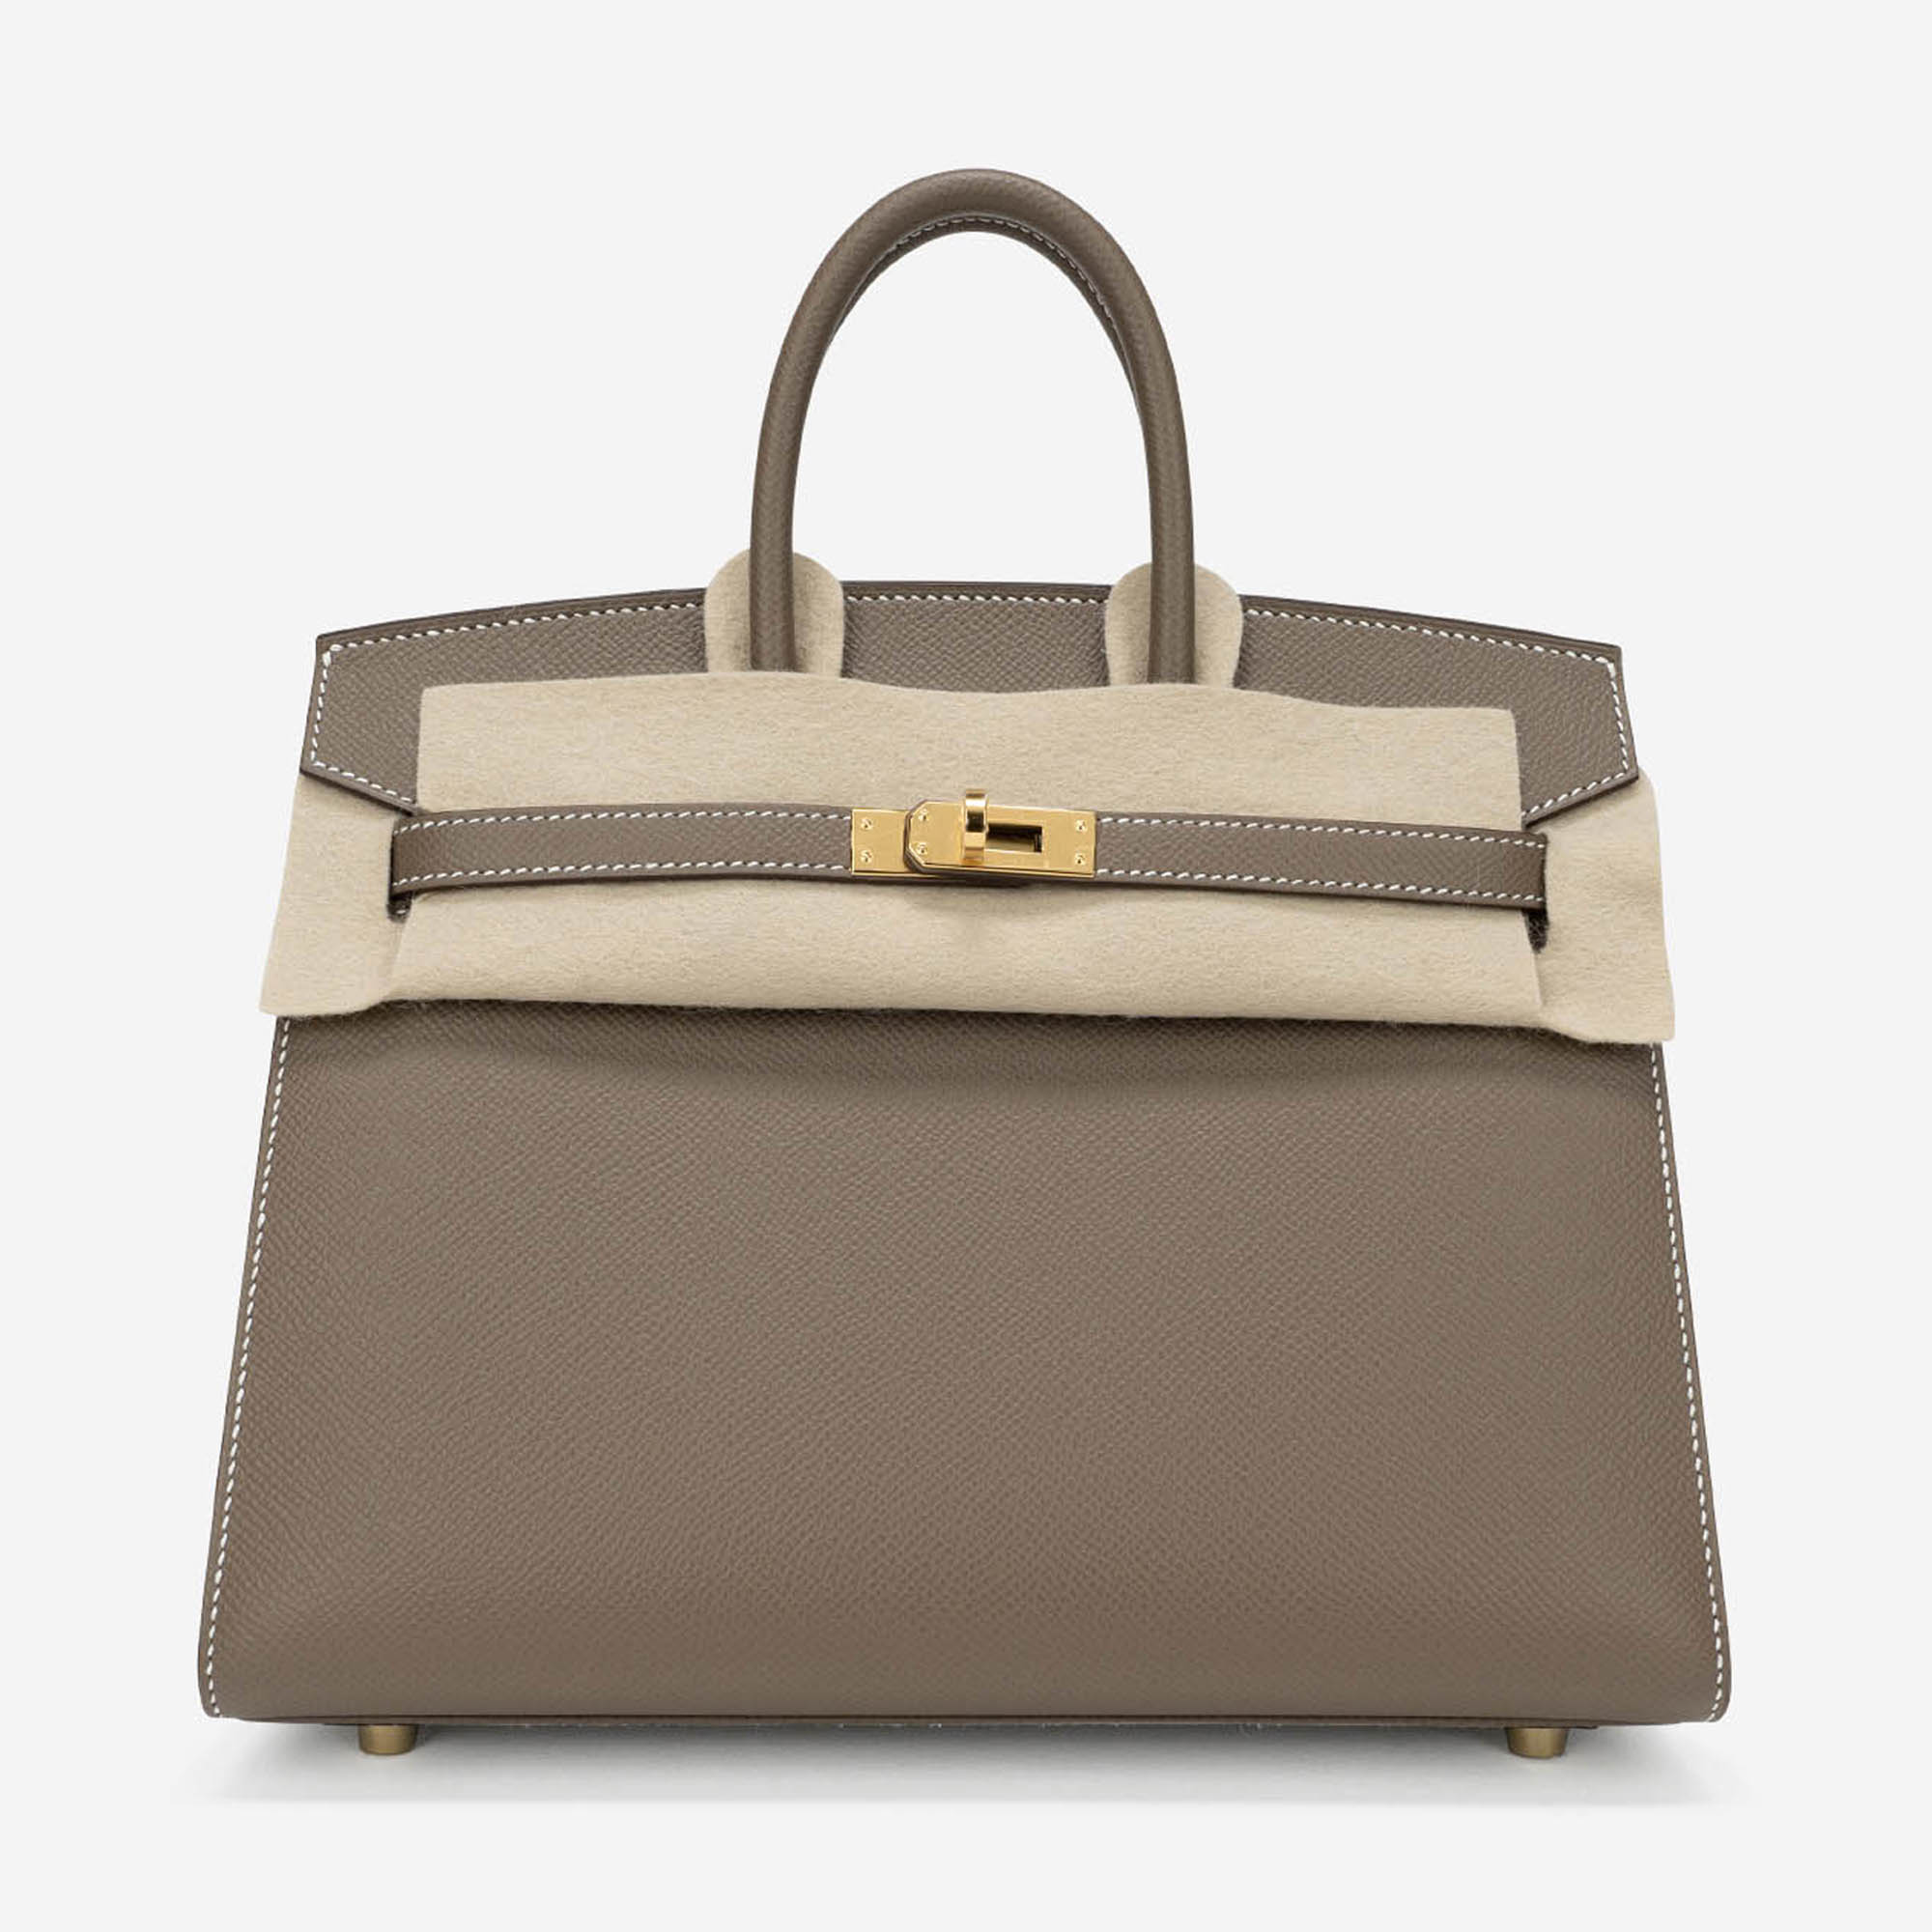 Hermès Birkin Sellier: Everything you Need to Know